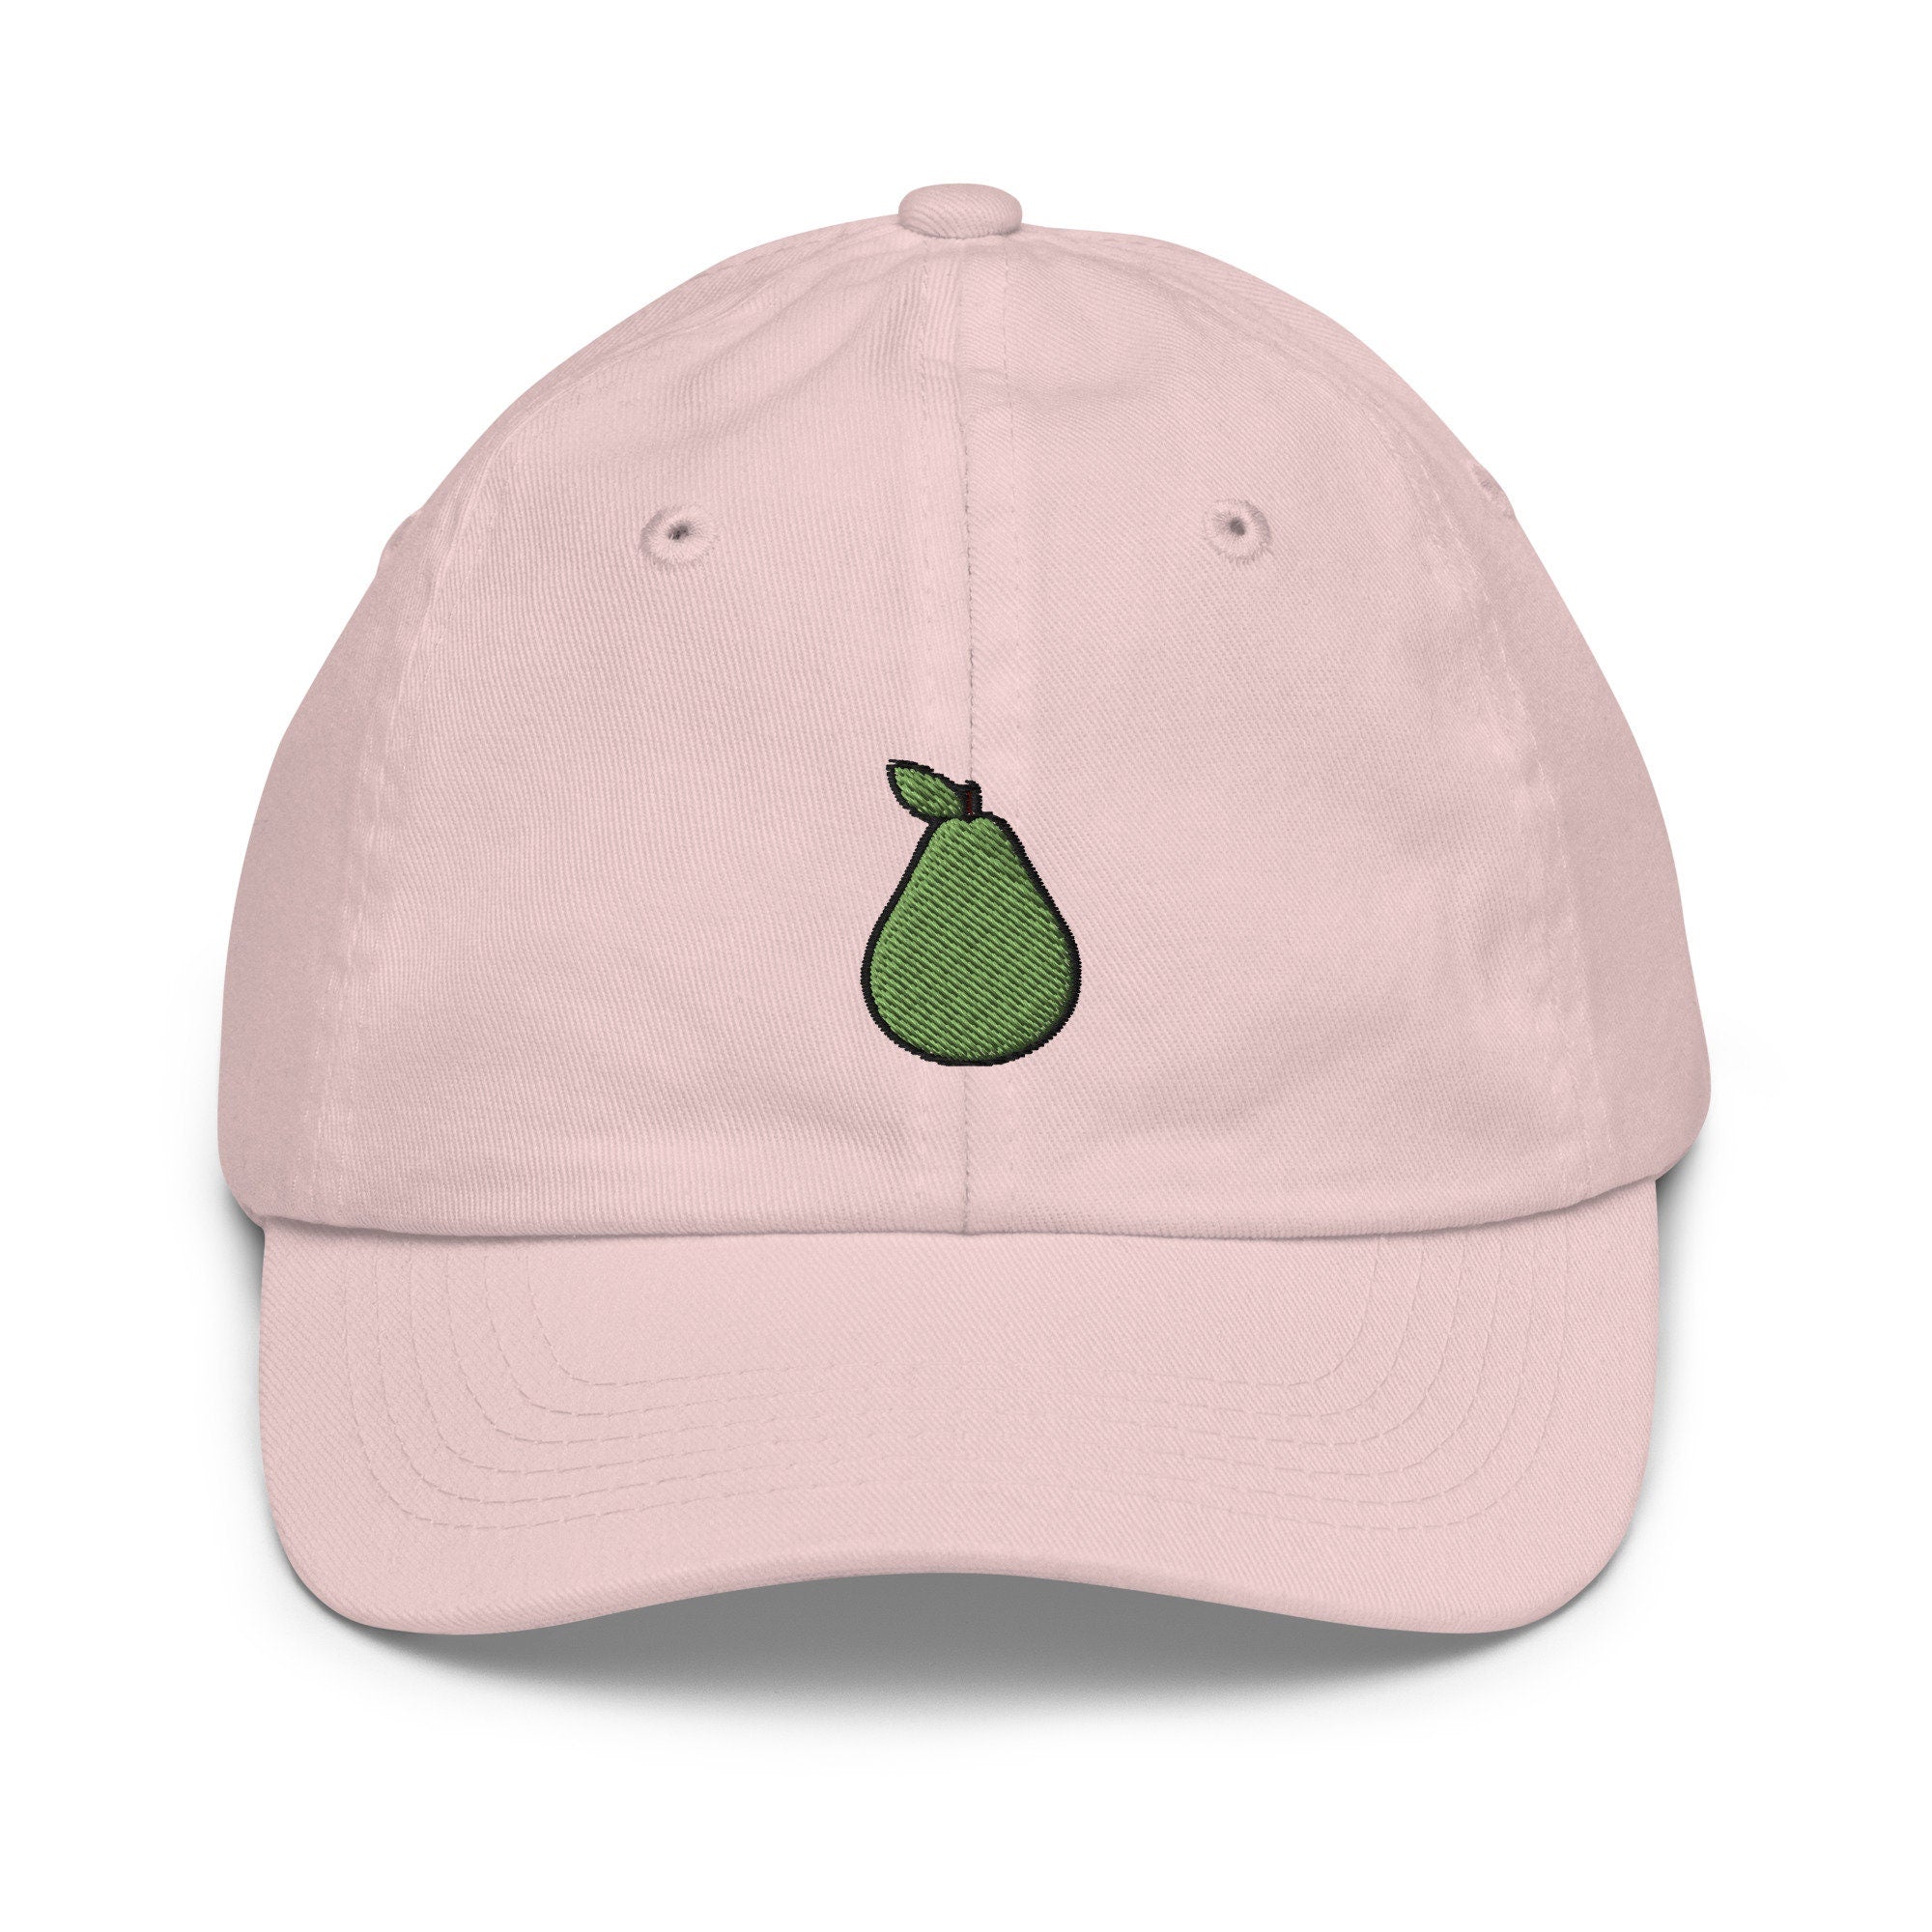 Kids Pear Youth Baseball Cap, Embroidered Kids Hat, Childrens Hat Gift - Multiple Colors